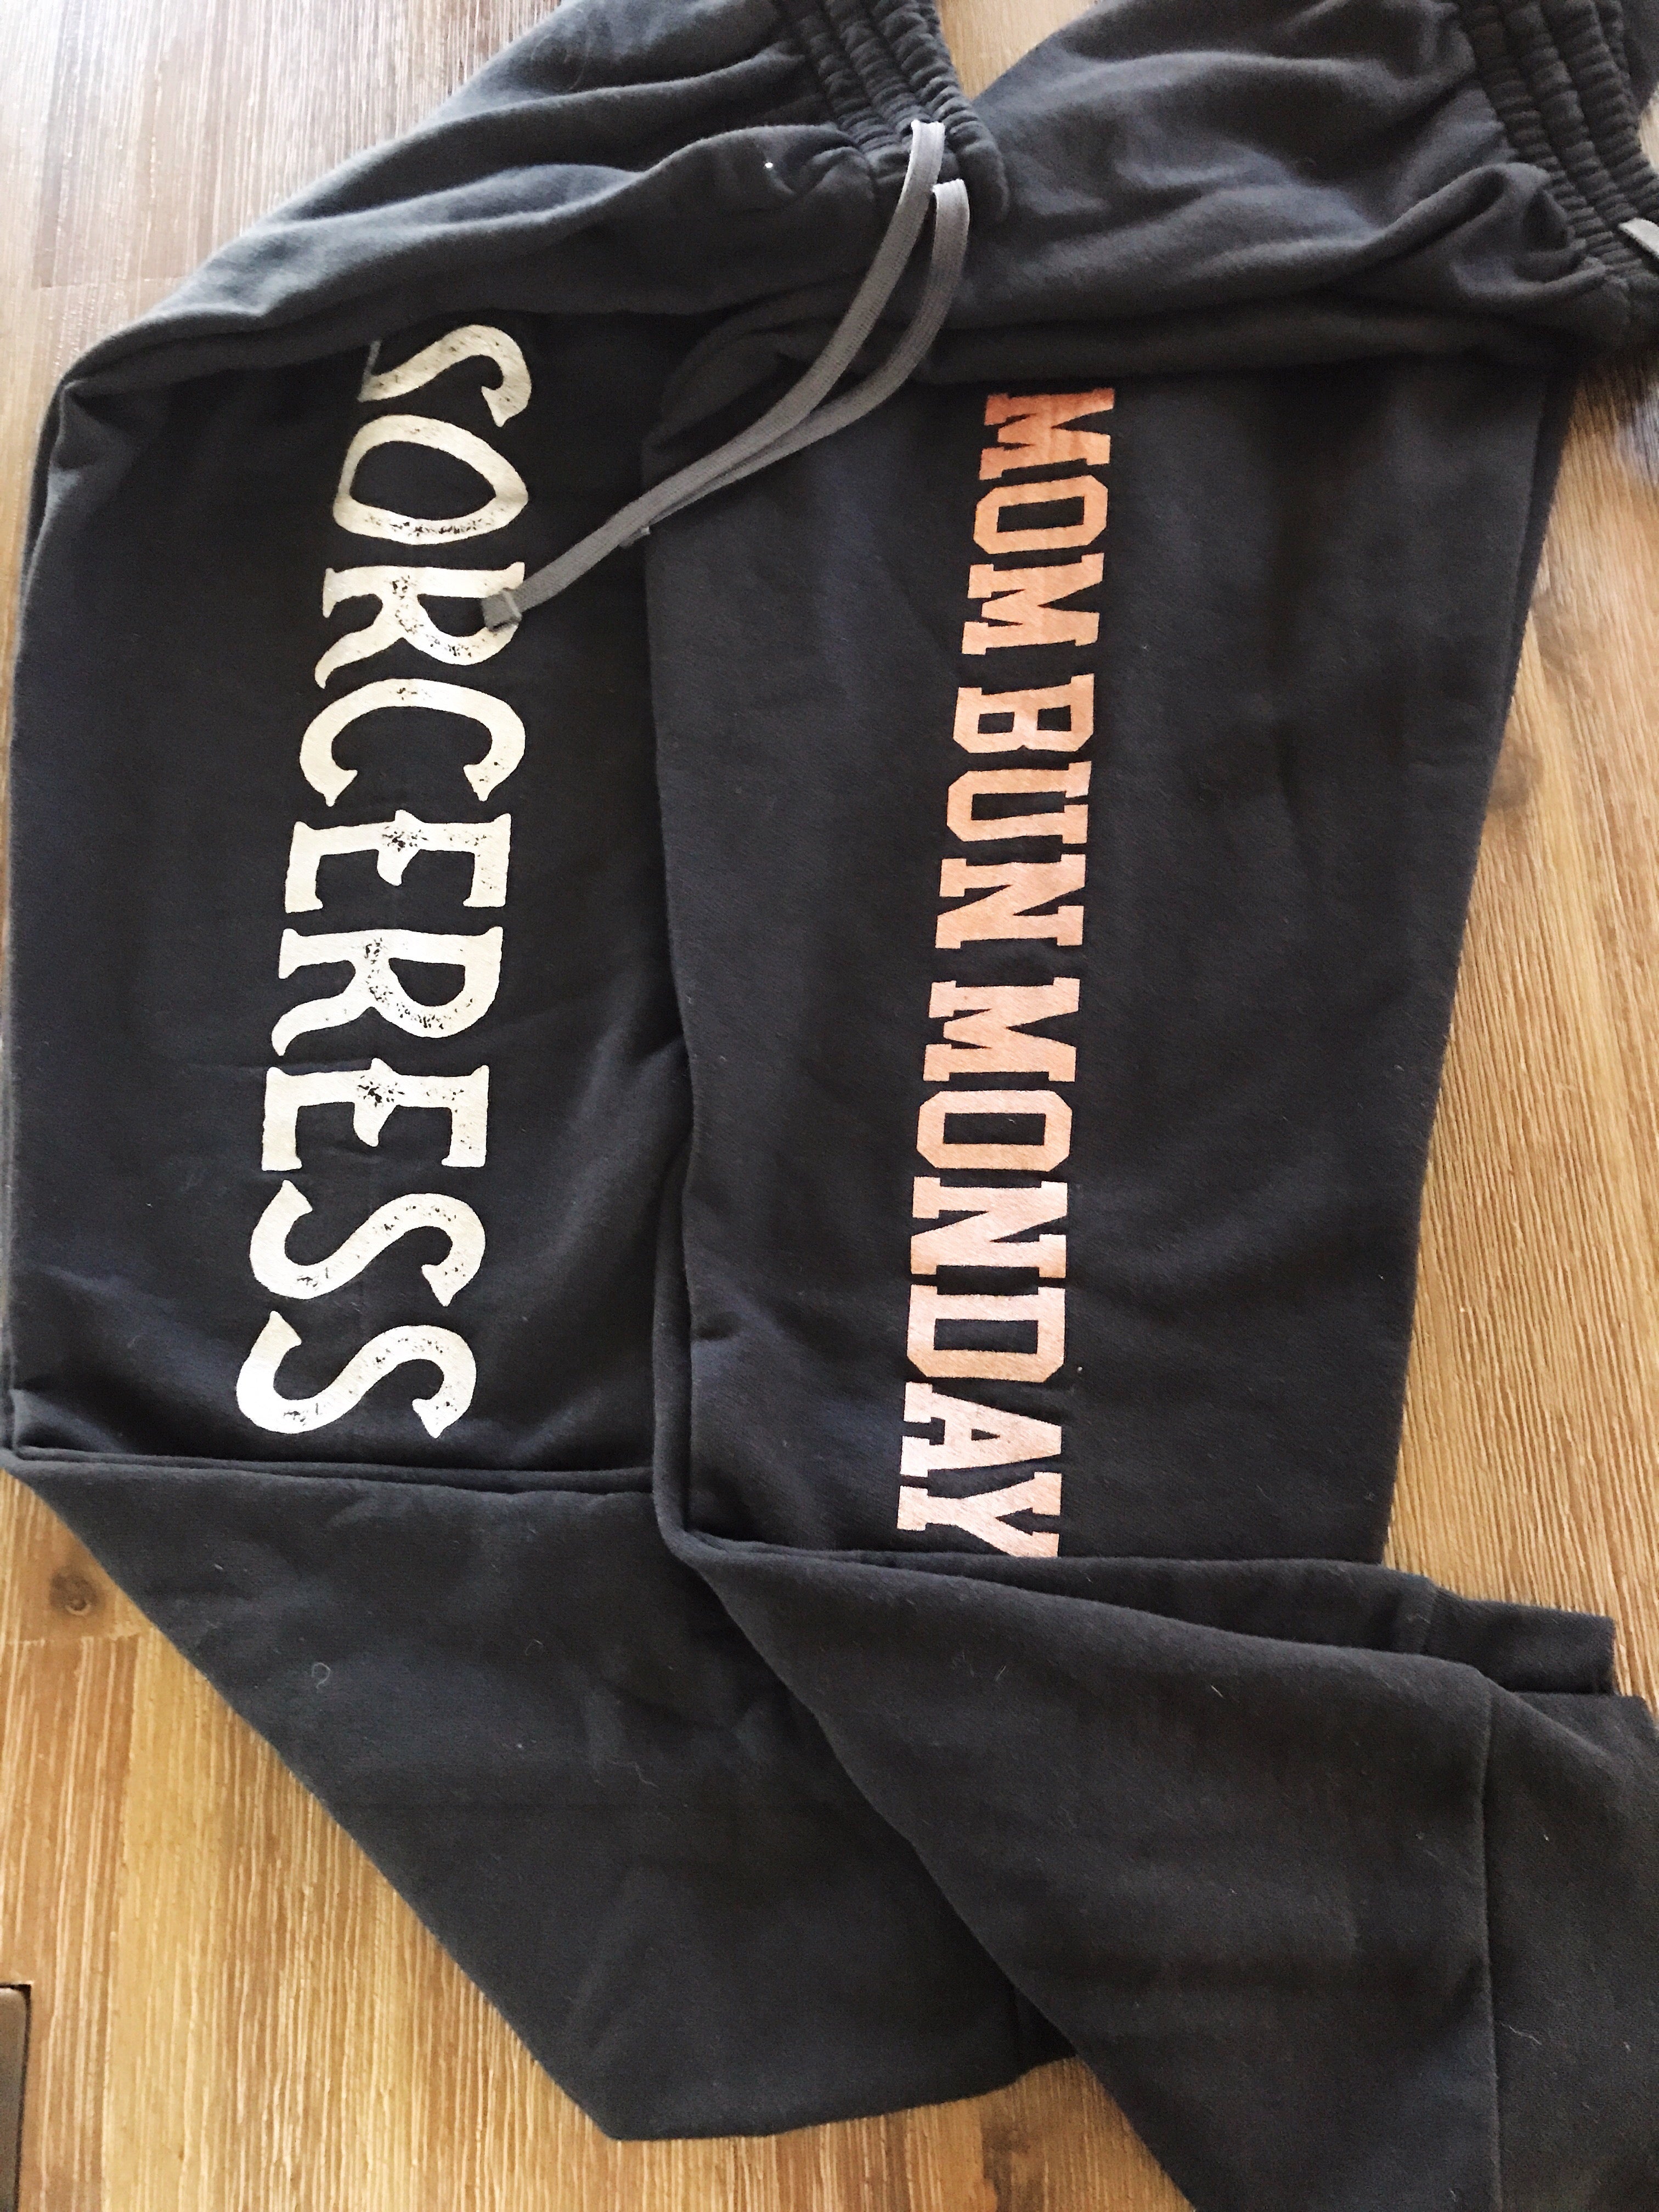 « SORCERESS JOGGERS » BLACK WITH SILVER SHIMMER